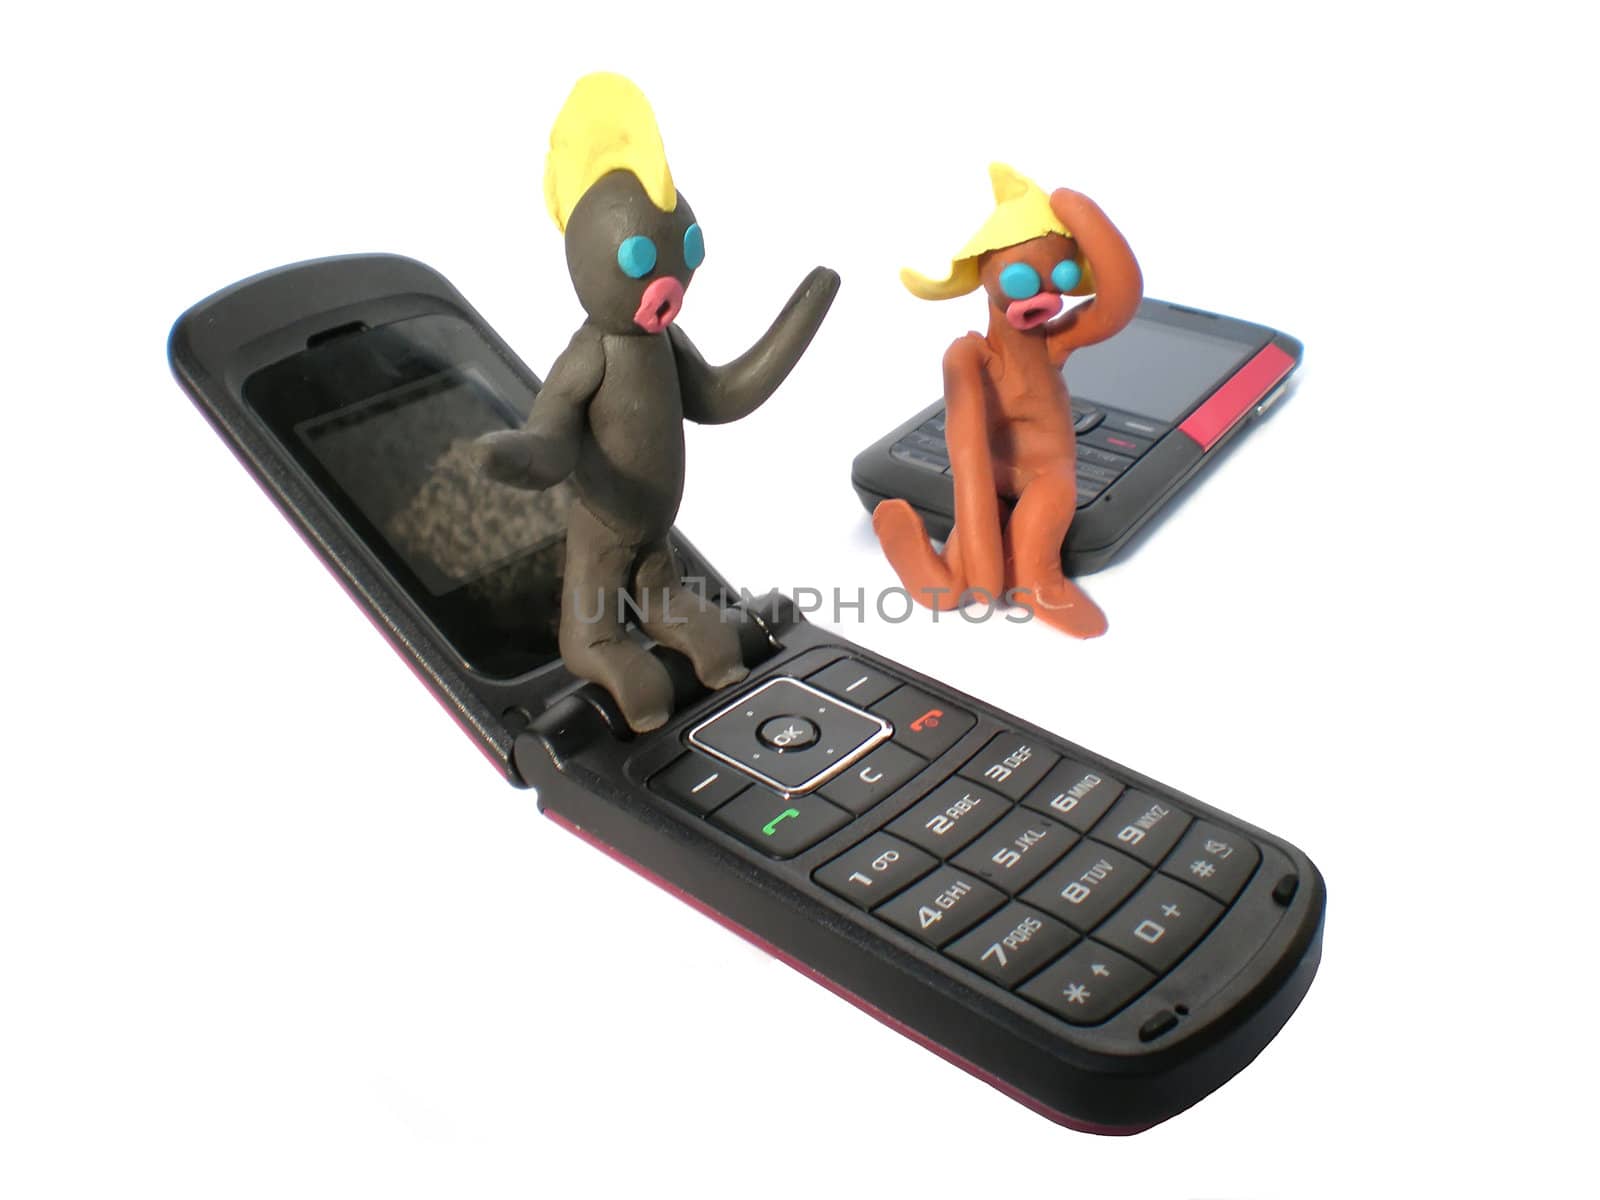 plasticine people figures with phones on white background